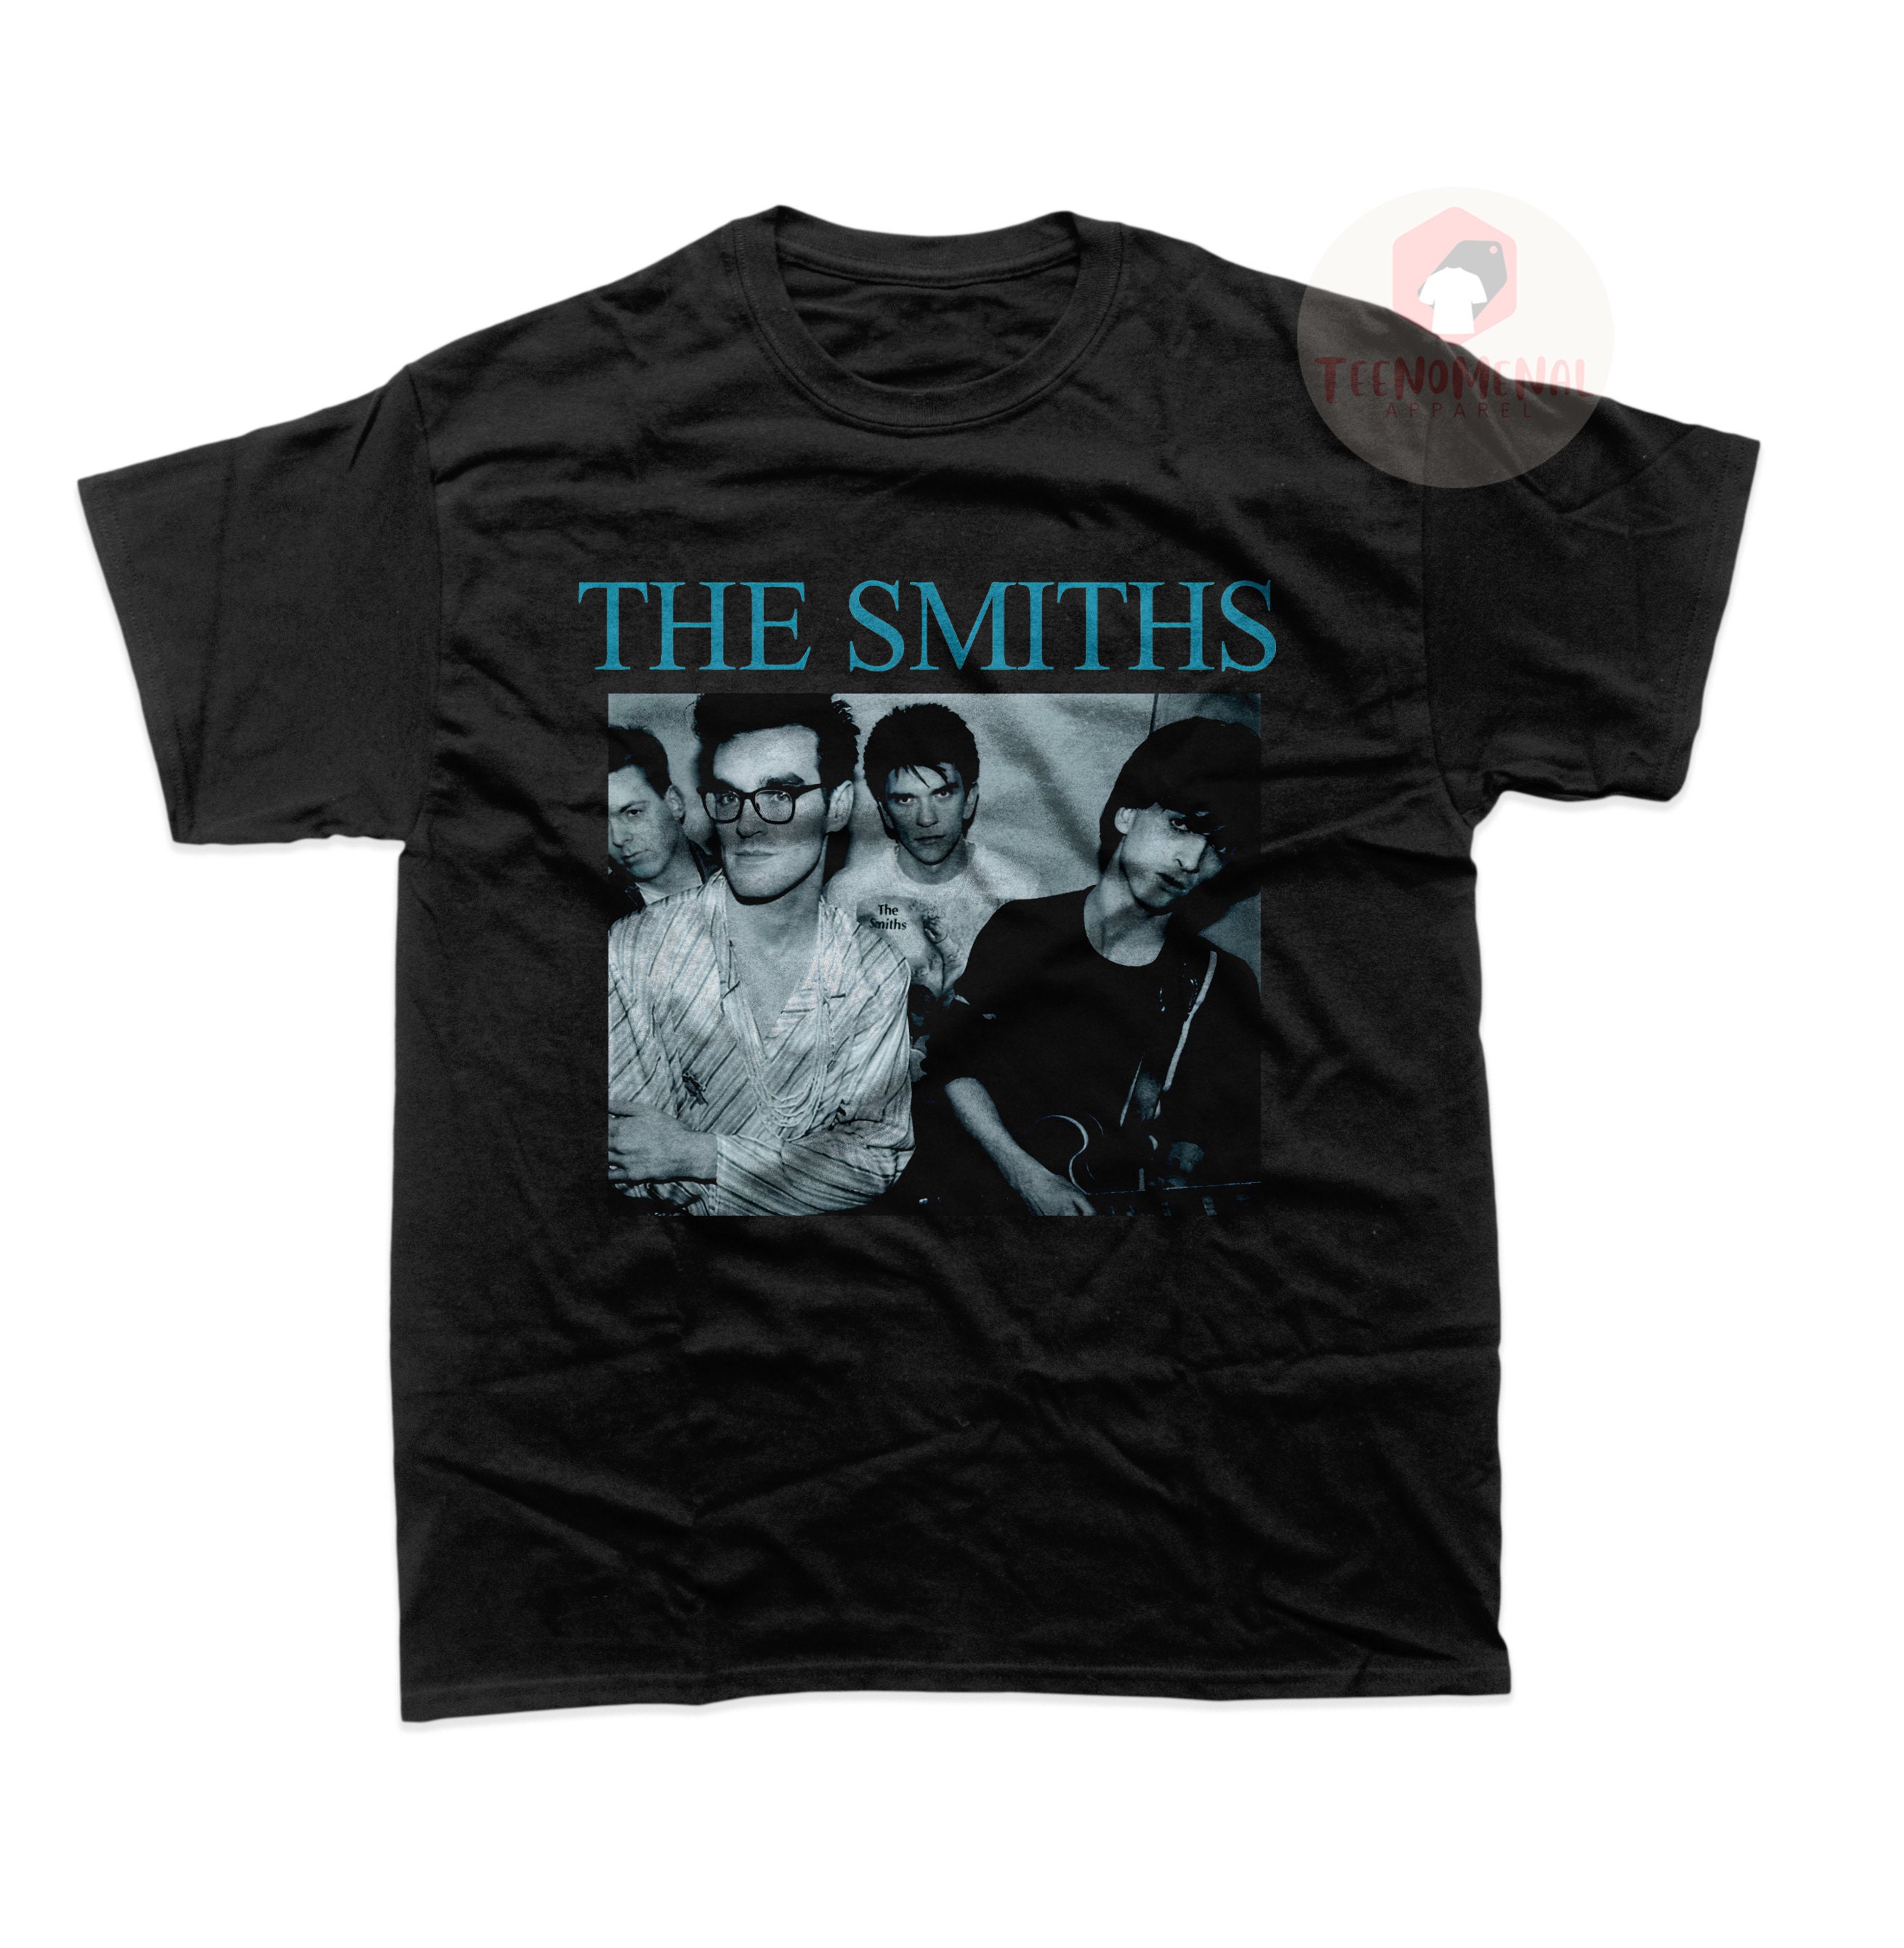 The Smiths Unisex T-Shirt - The Sound Of The Smiths Album Tee